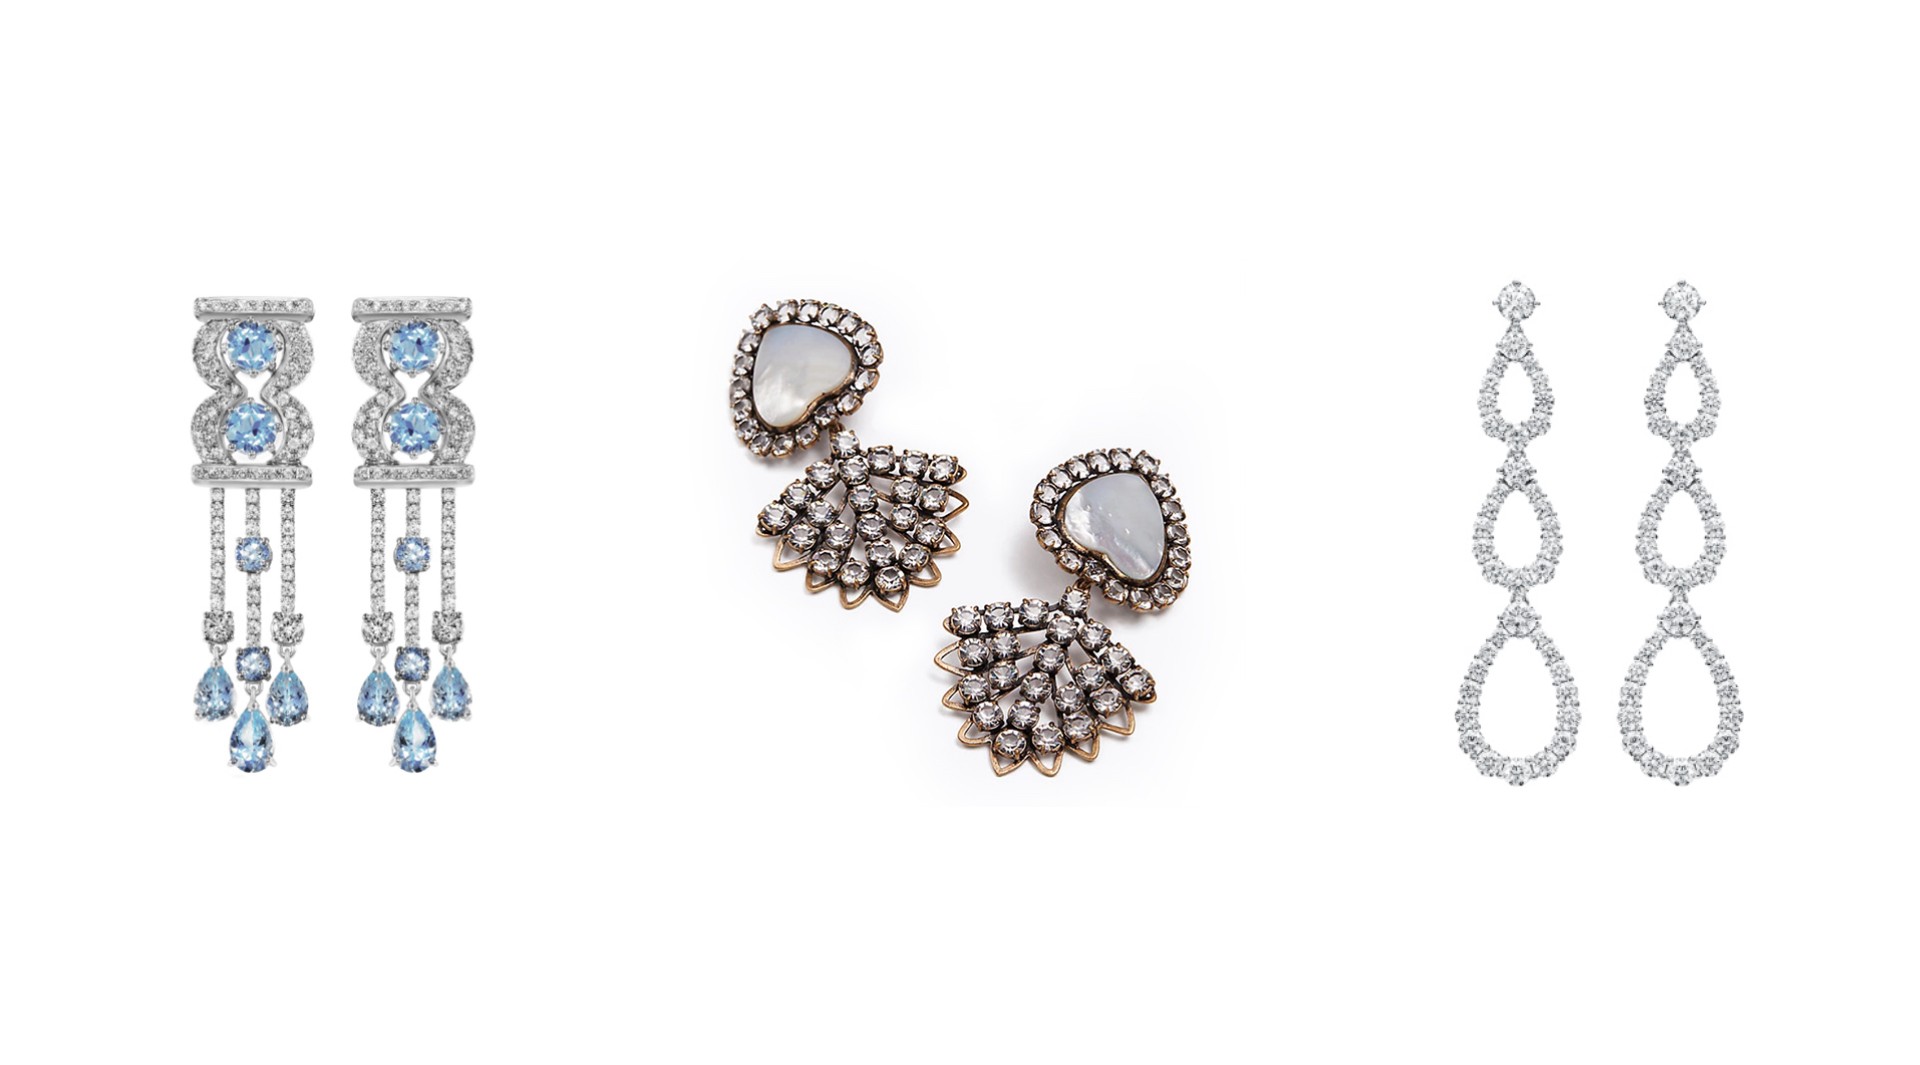 Statement Earrings for the Holiday Season